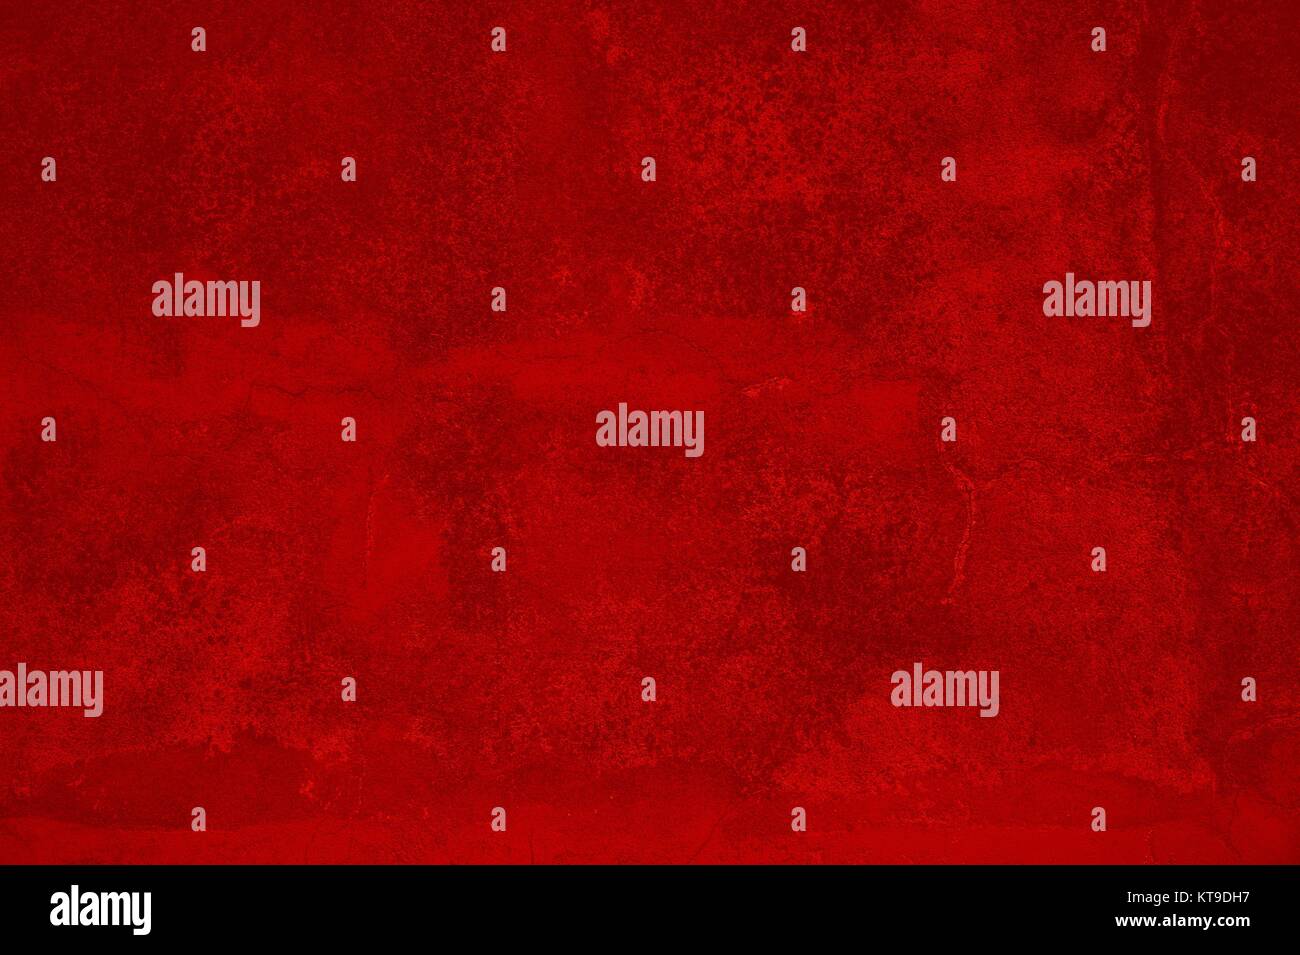 cool old grunge background red Stock Photo